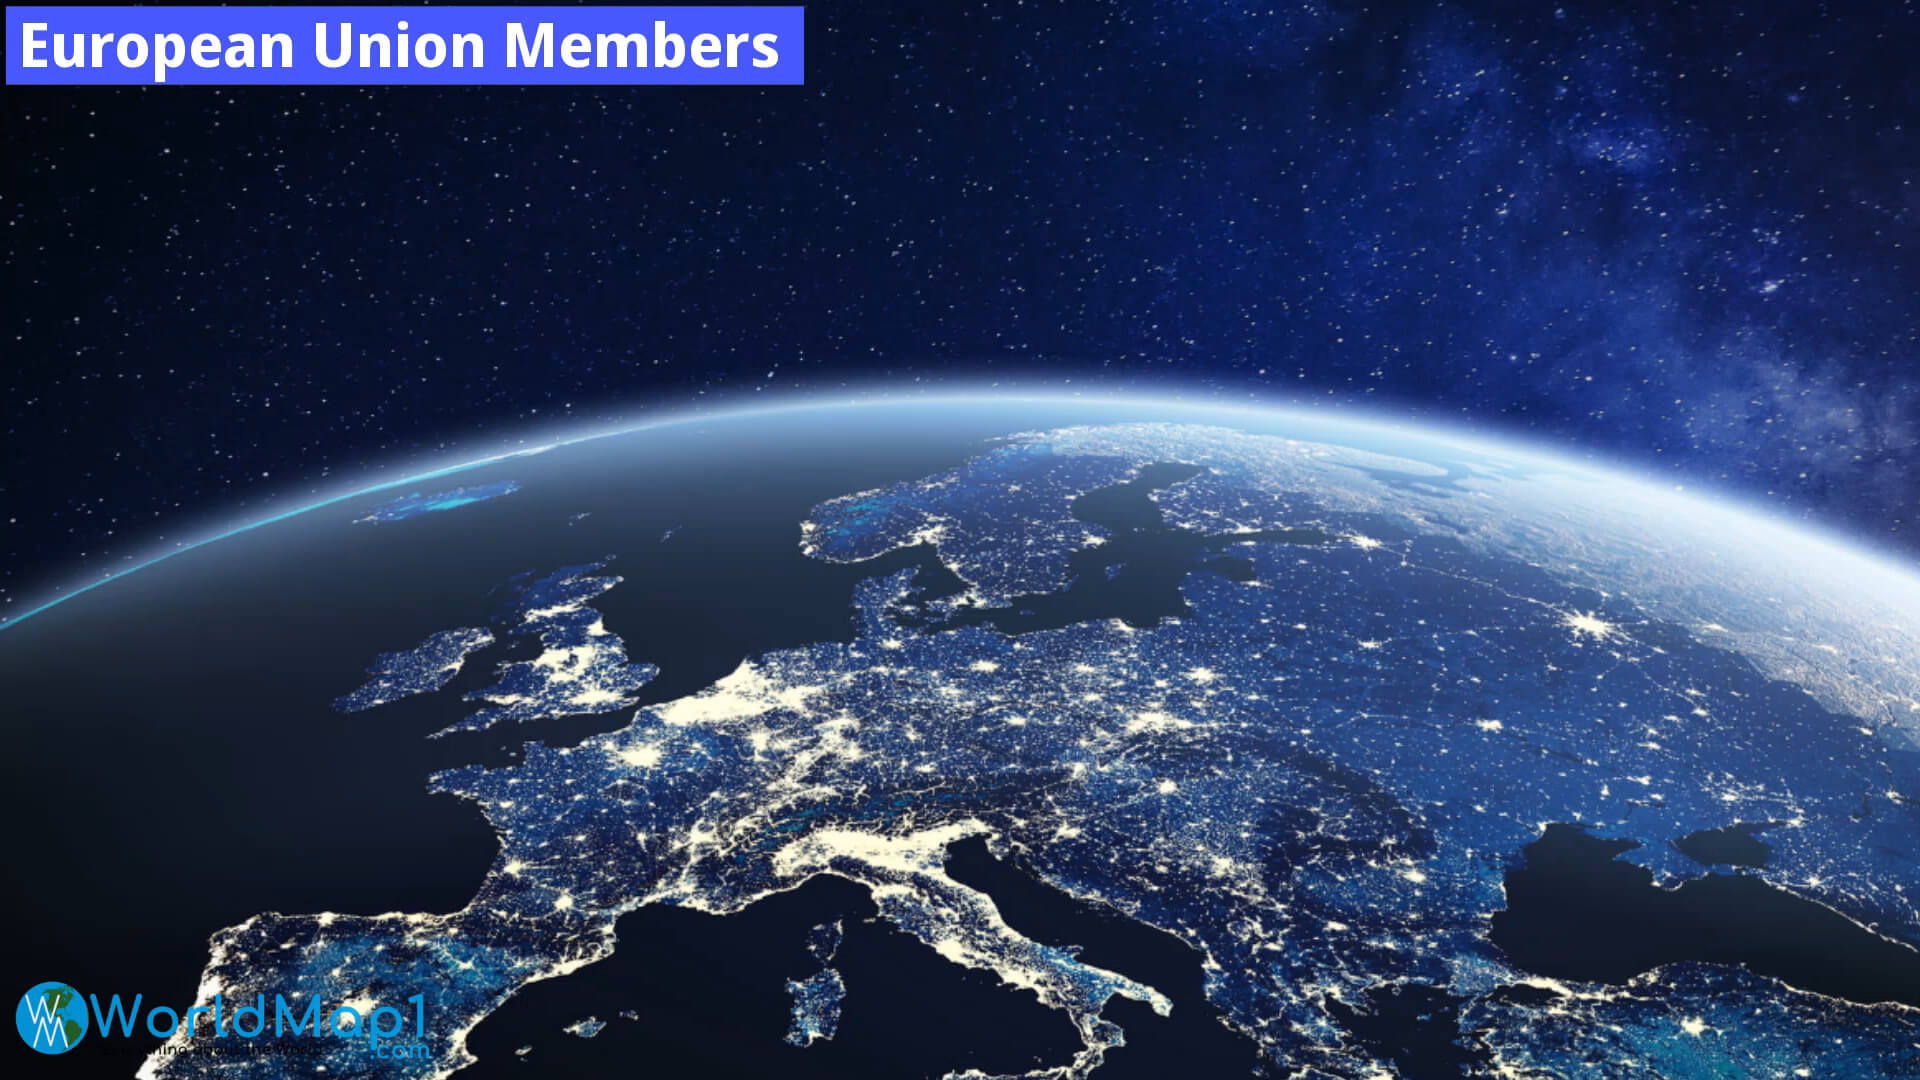 European Union Members Map from Space